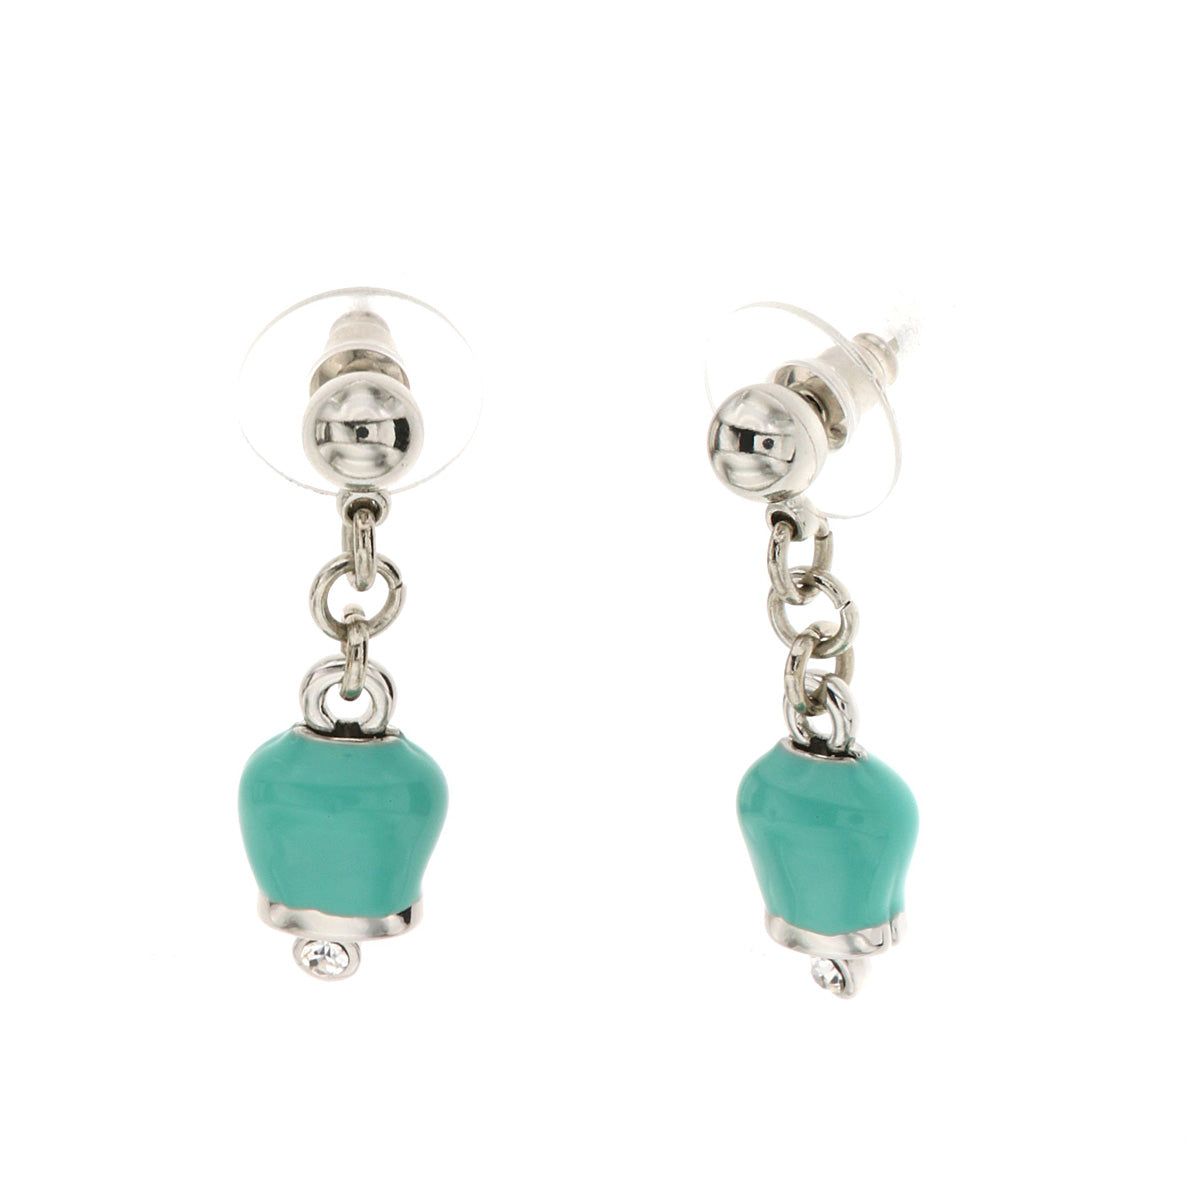 Metal earrings with billets charms of water green pendants, embellished with light point